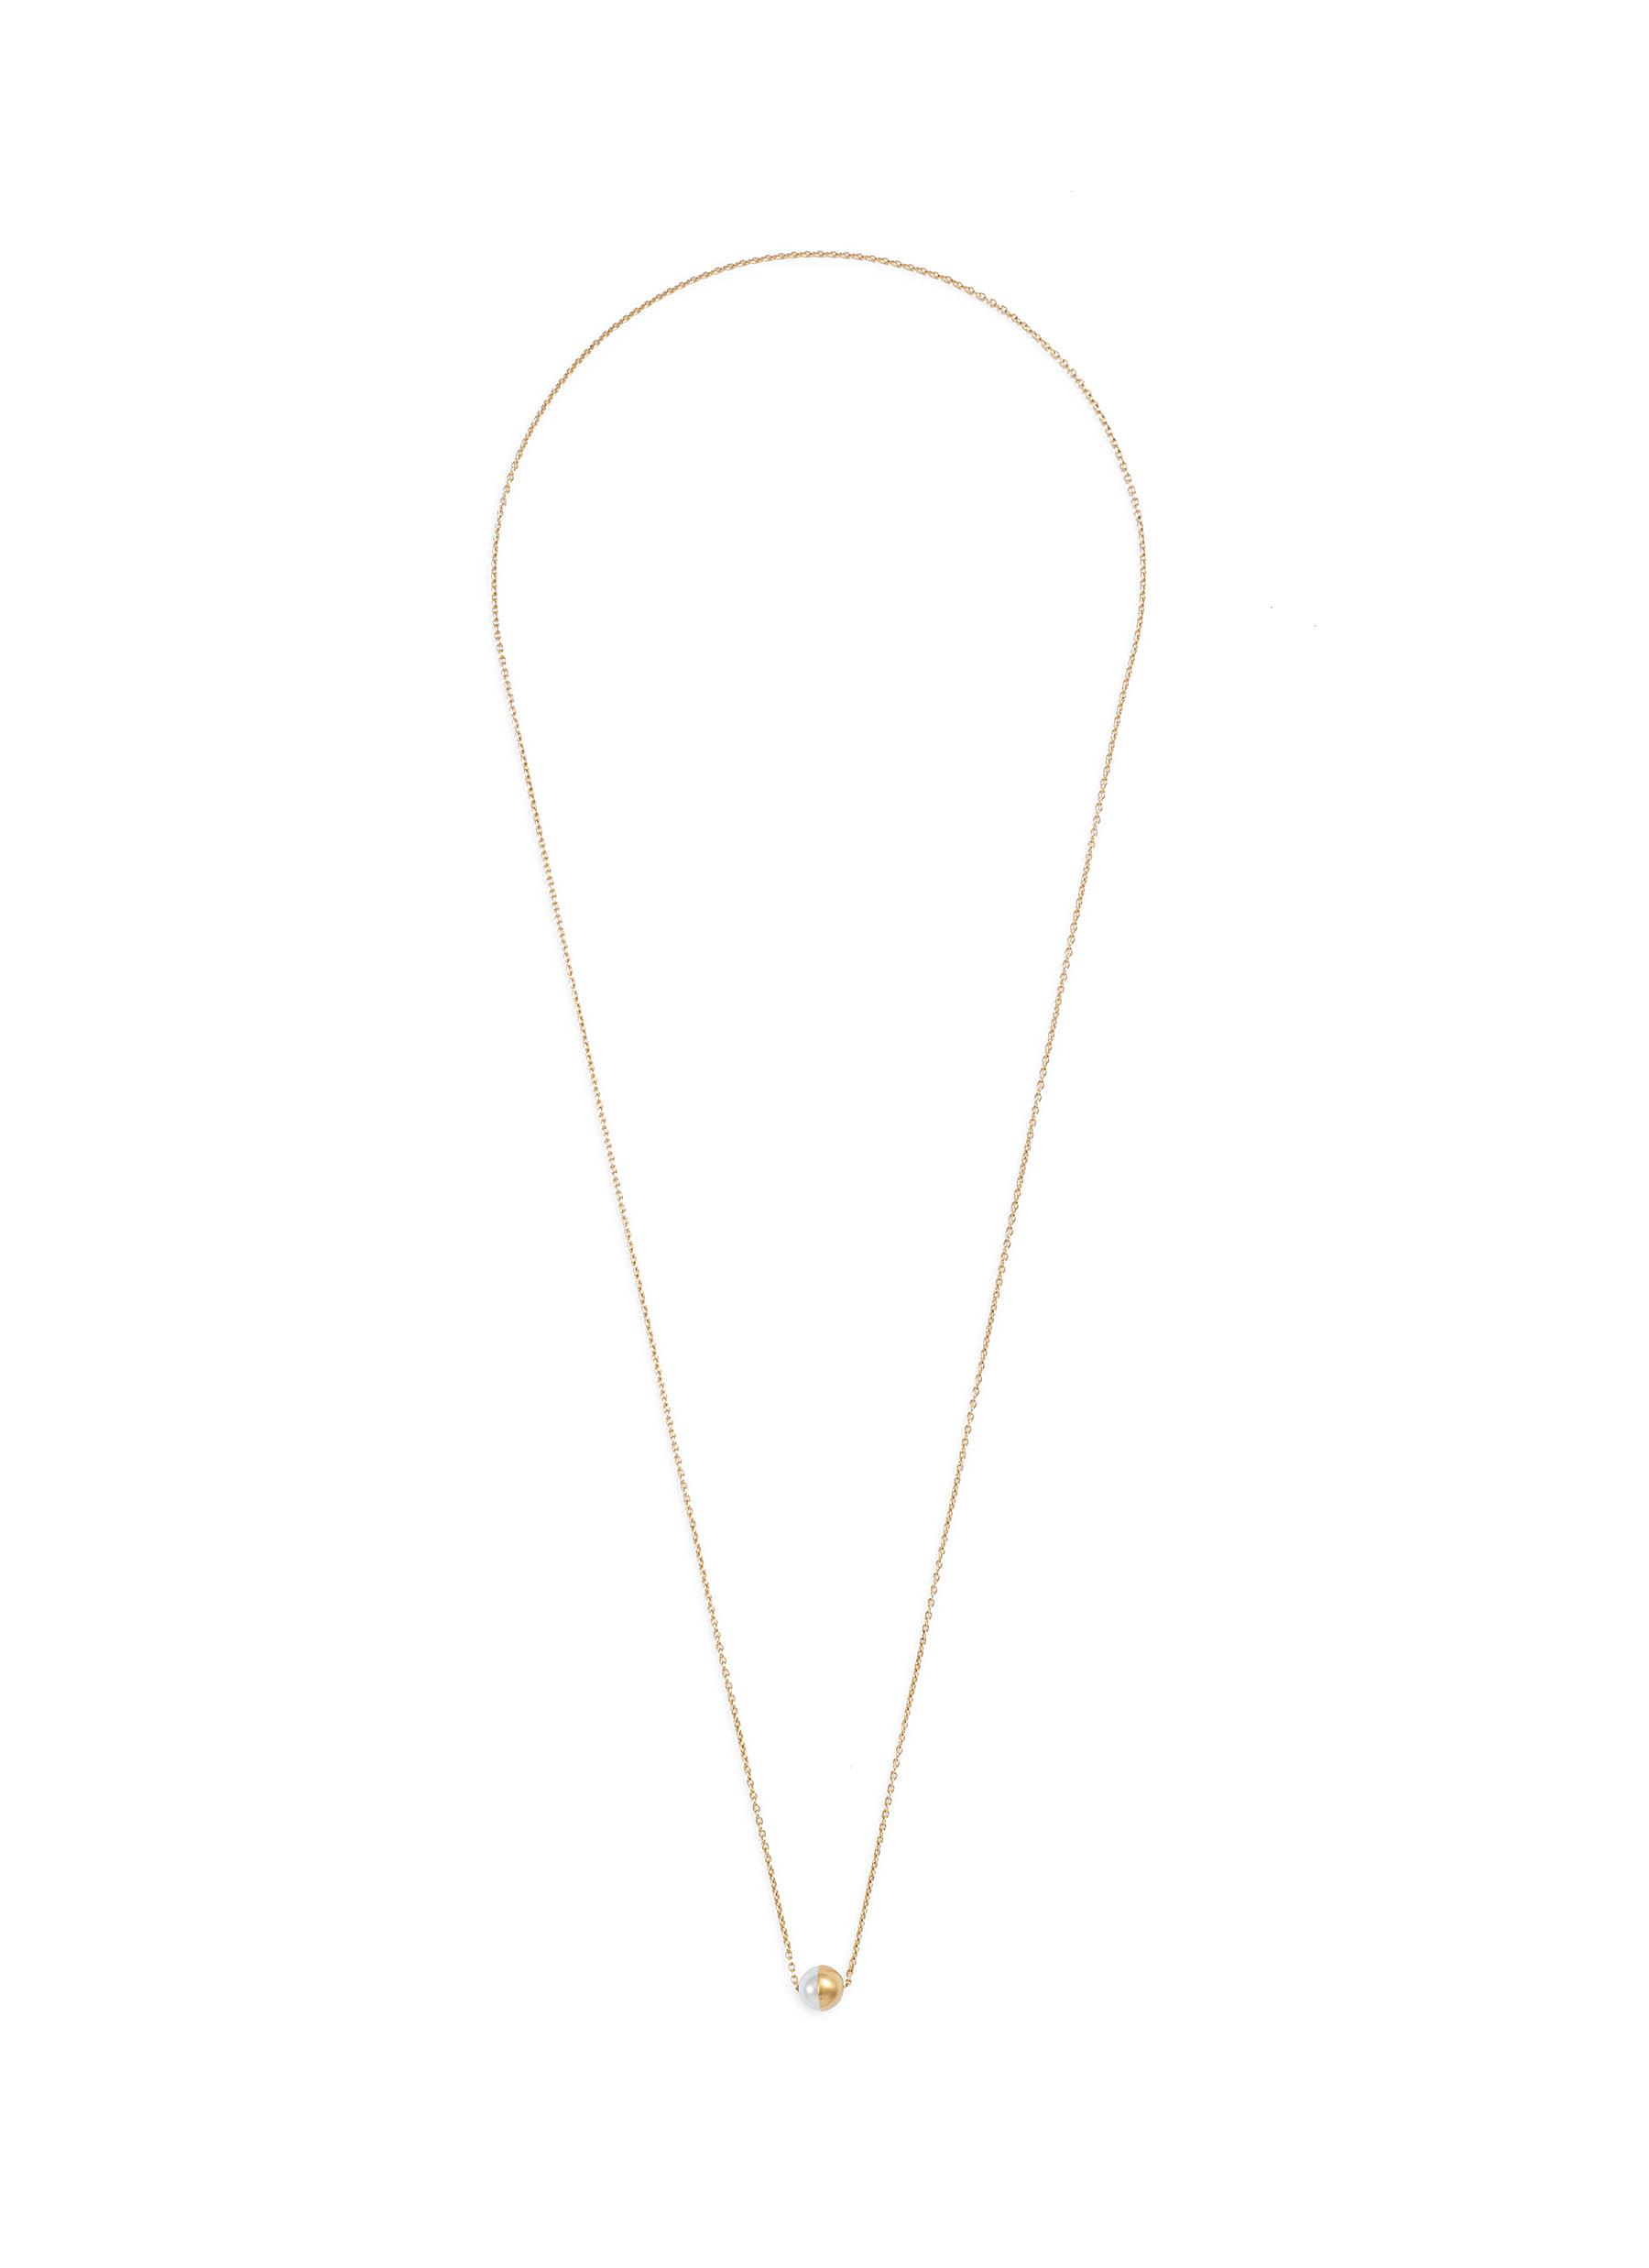 'Half Pearl 90°' 18k yellow gold pendant necklace